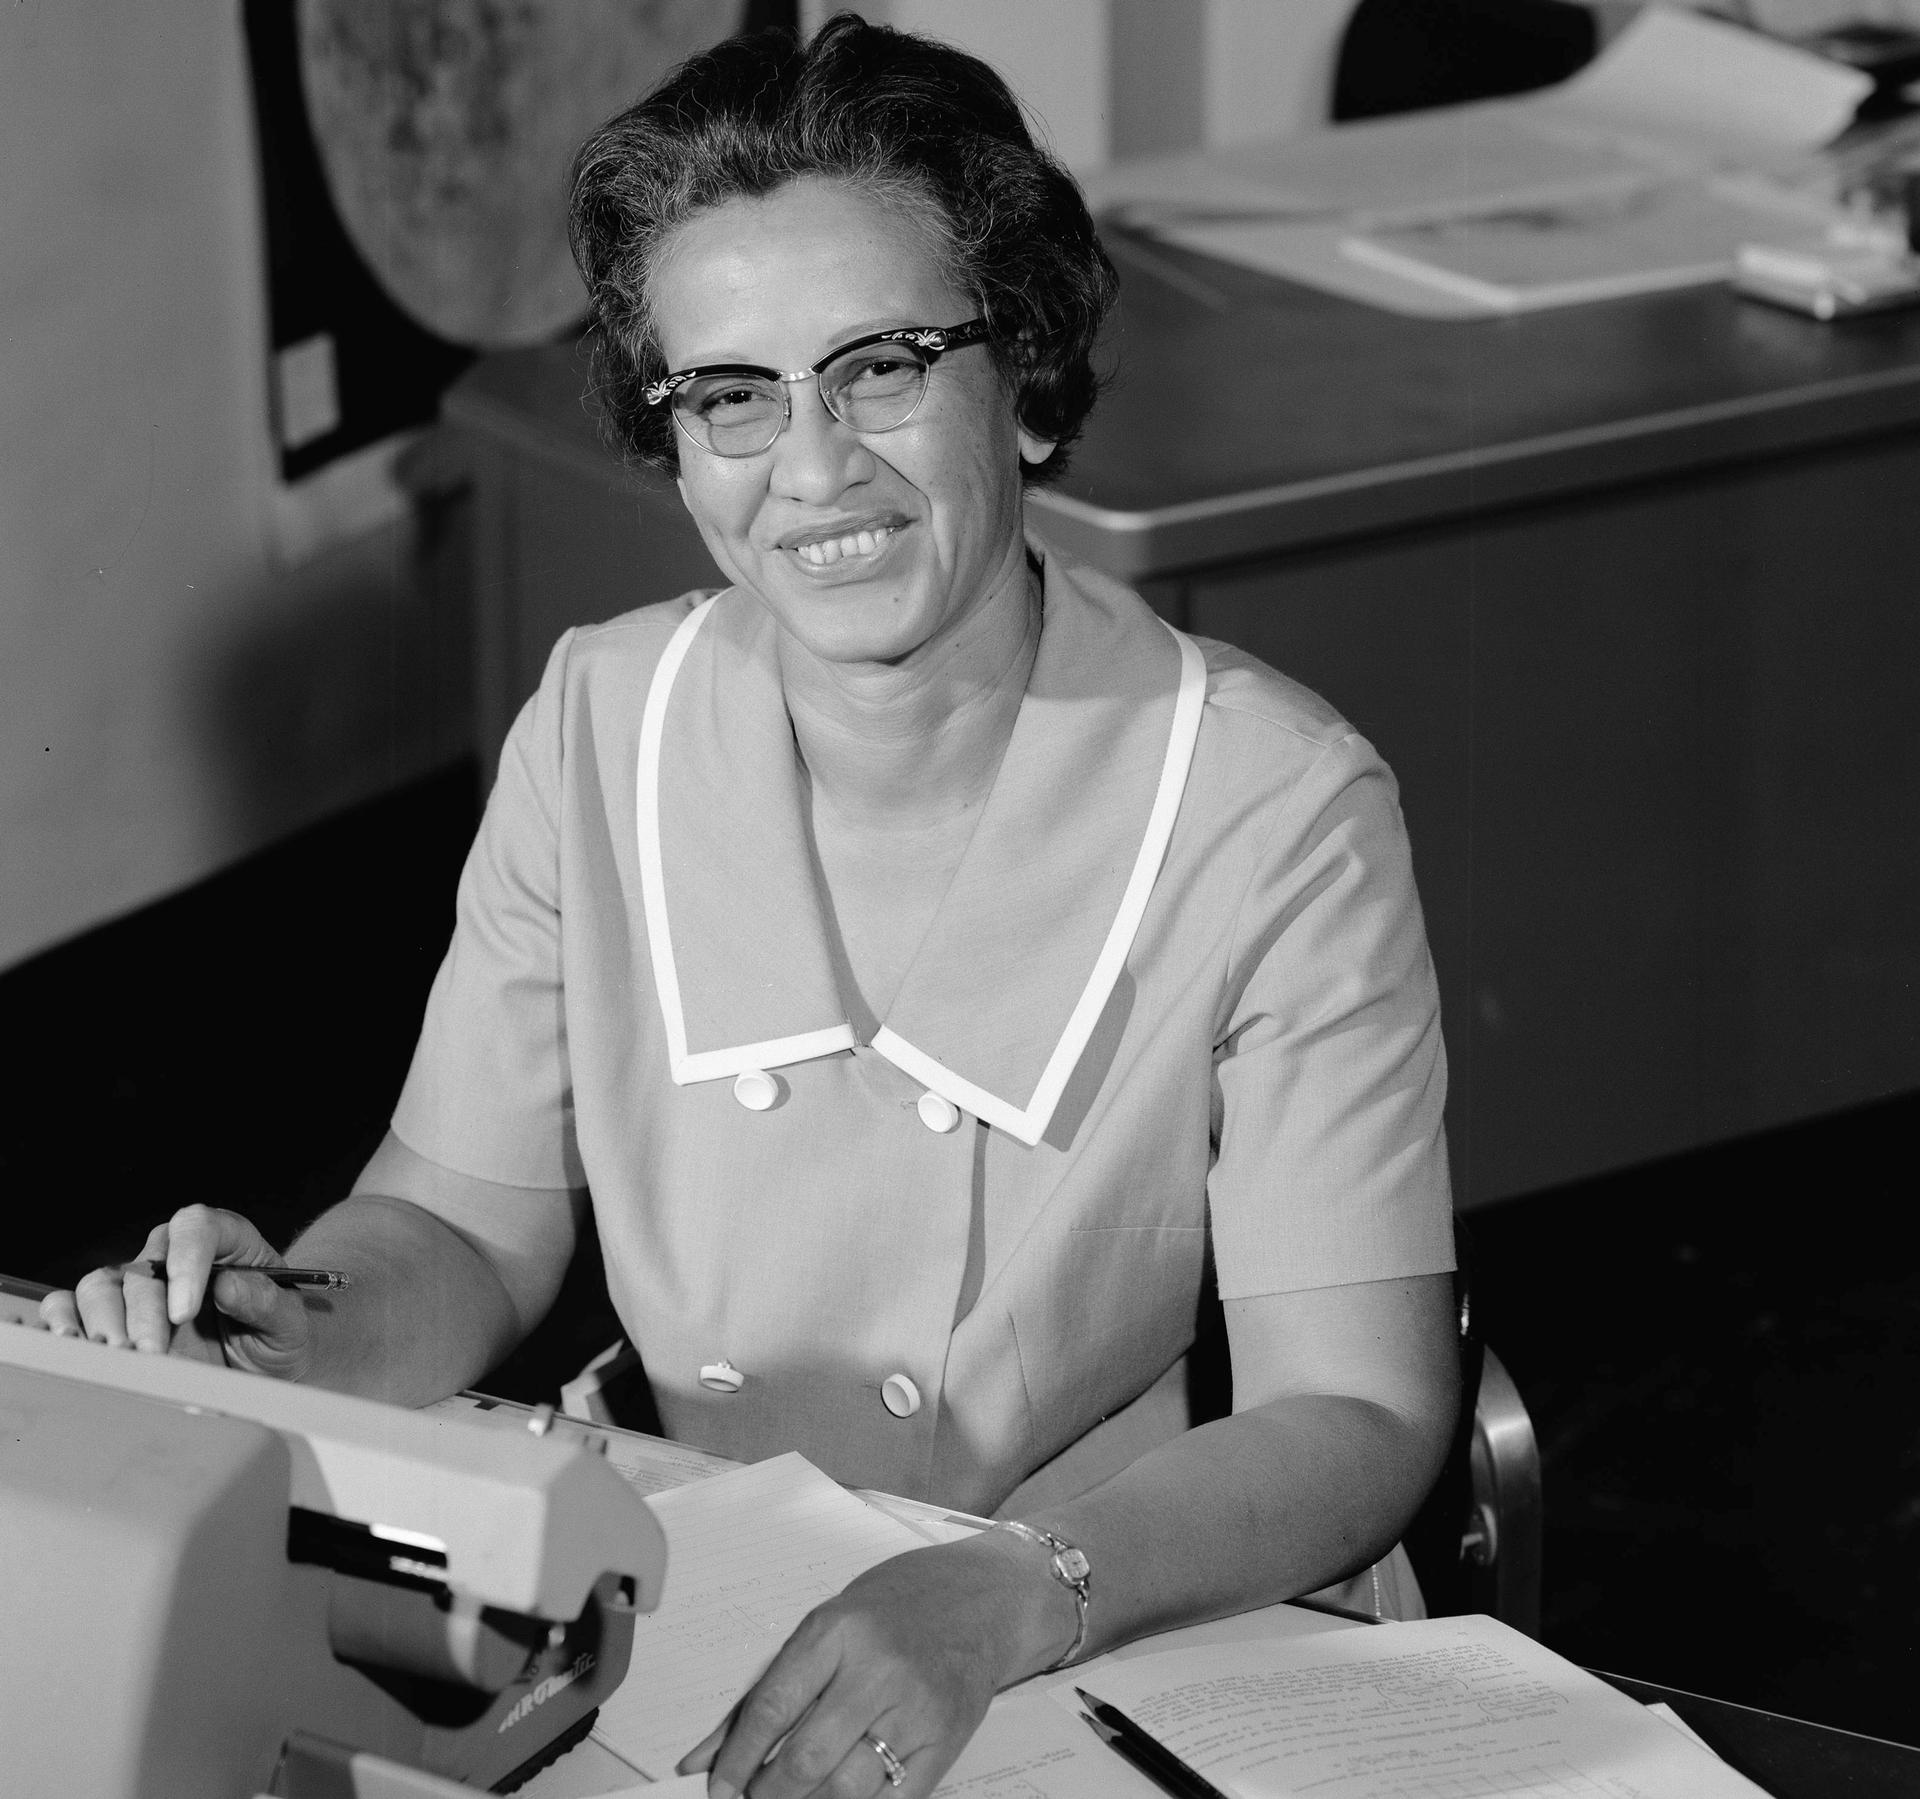 NASA research mathematician Katherine Johnson is shown in a portrait photo sitting at a desk with a typewriter on it.